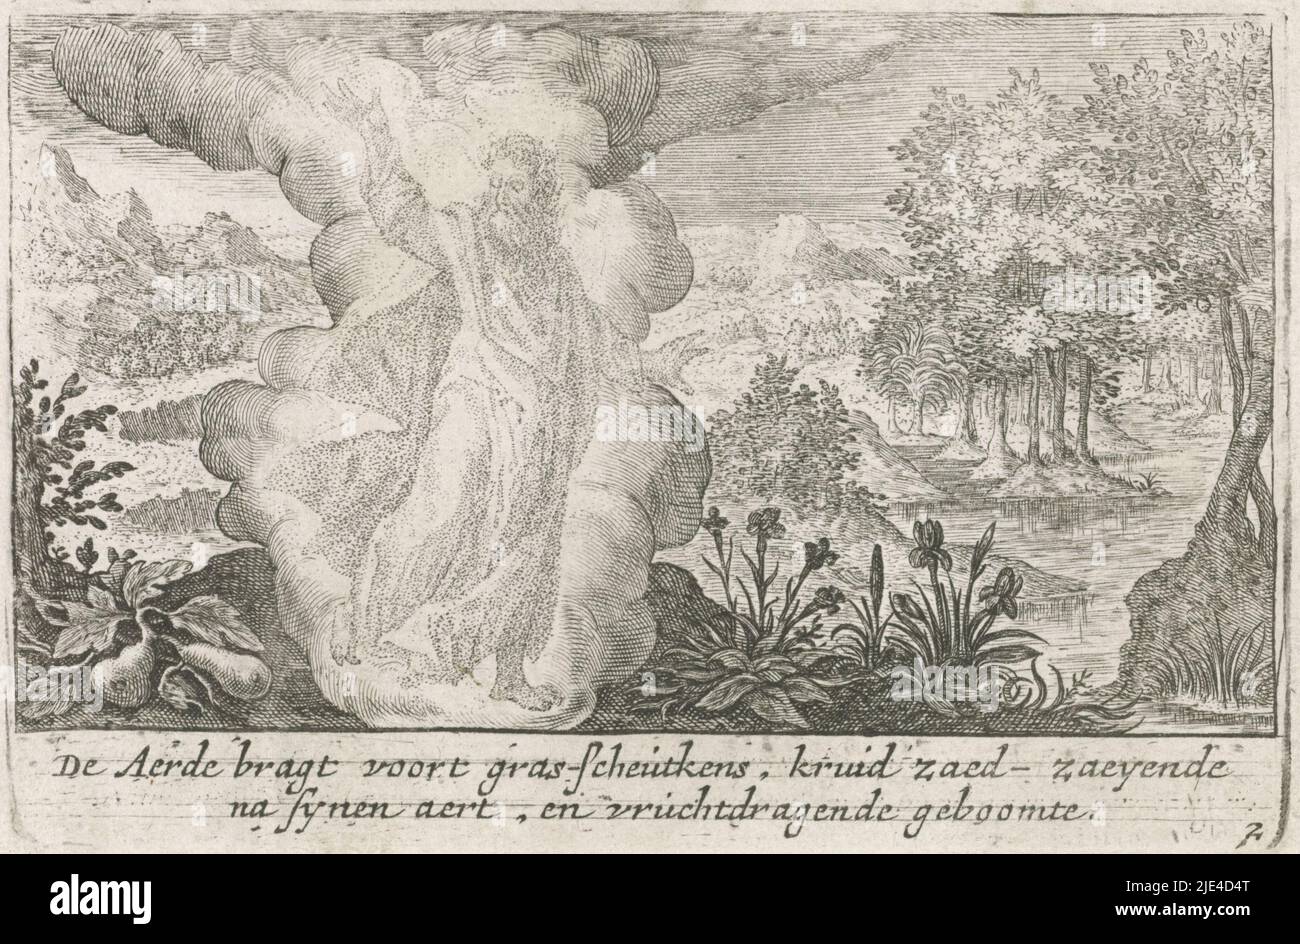 God creates the dry earth and the plants, Crispijn van de Passe (I), 1700 - 1750, God creates the land, the seed-forming plants and the trees with fruits that bear seeds. The water recedes into rivers and the sea. In the margin a two-line caption in Dutch., print maker: Crispijn van de Passe (I), publisher: Isaac Greve, print maker: Utrecht, publisher: Amsterdam, 1700 - 1750, paper, engraving, h 83 mm × w 125 mm Stock Photo